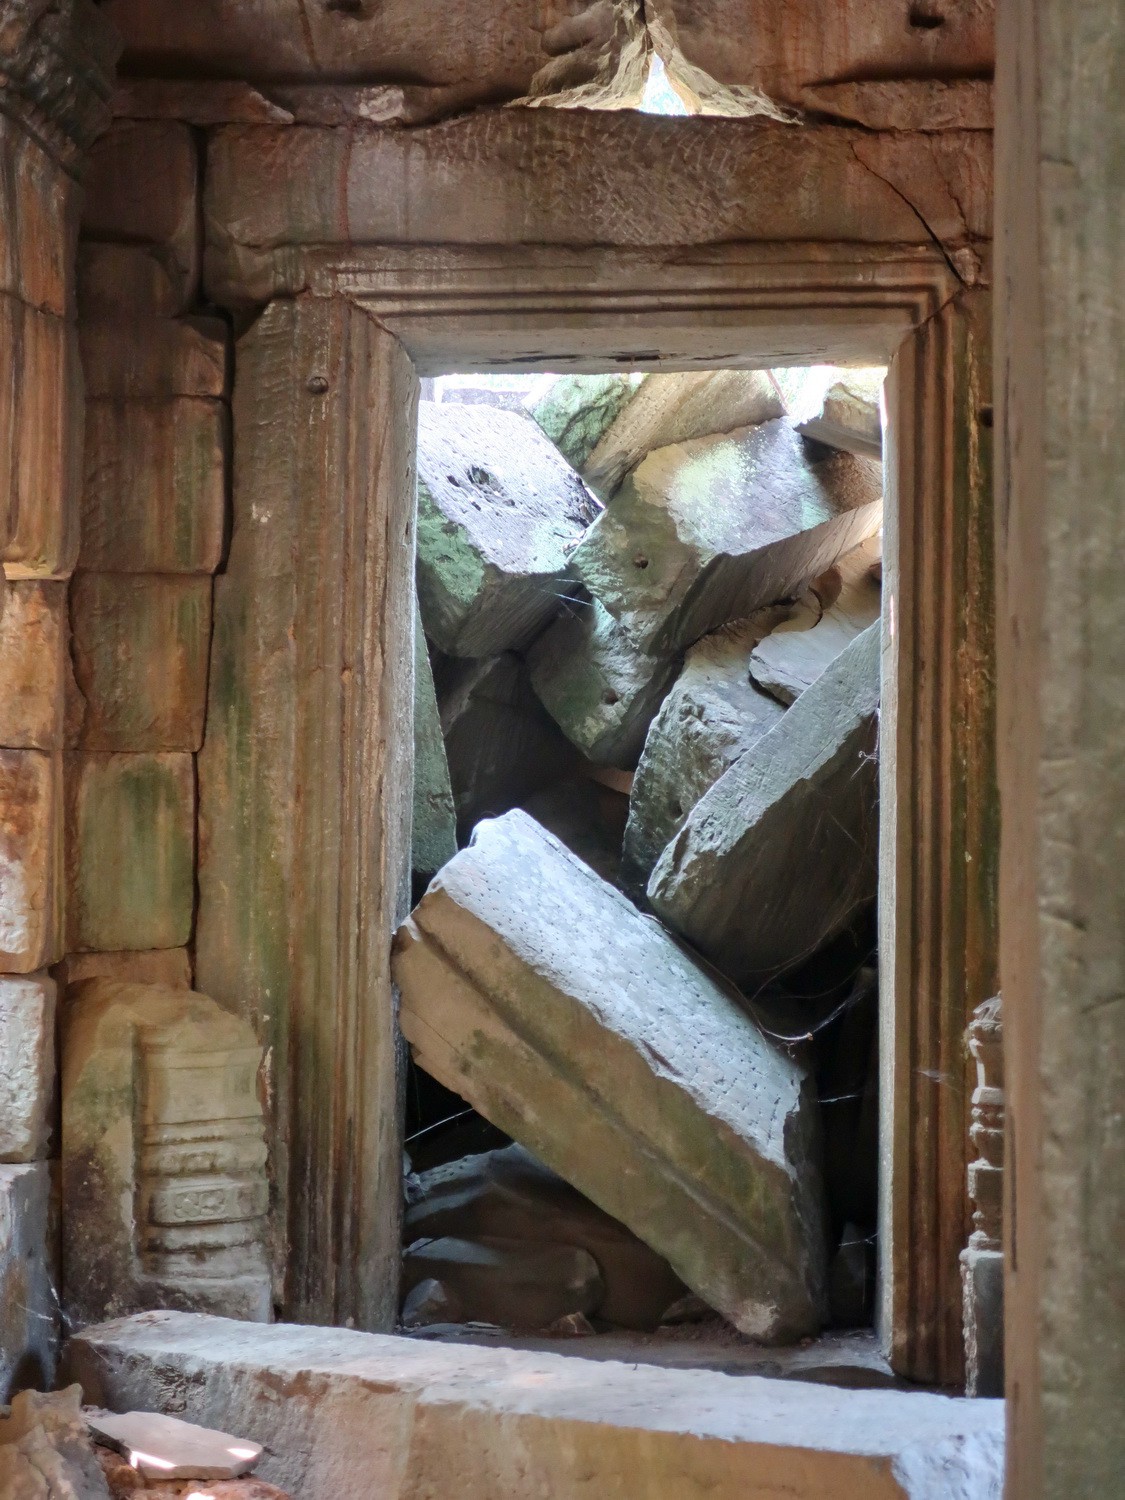 A lot of future work in the Preah Khan Ruins